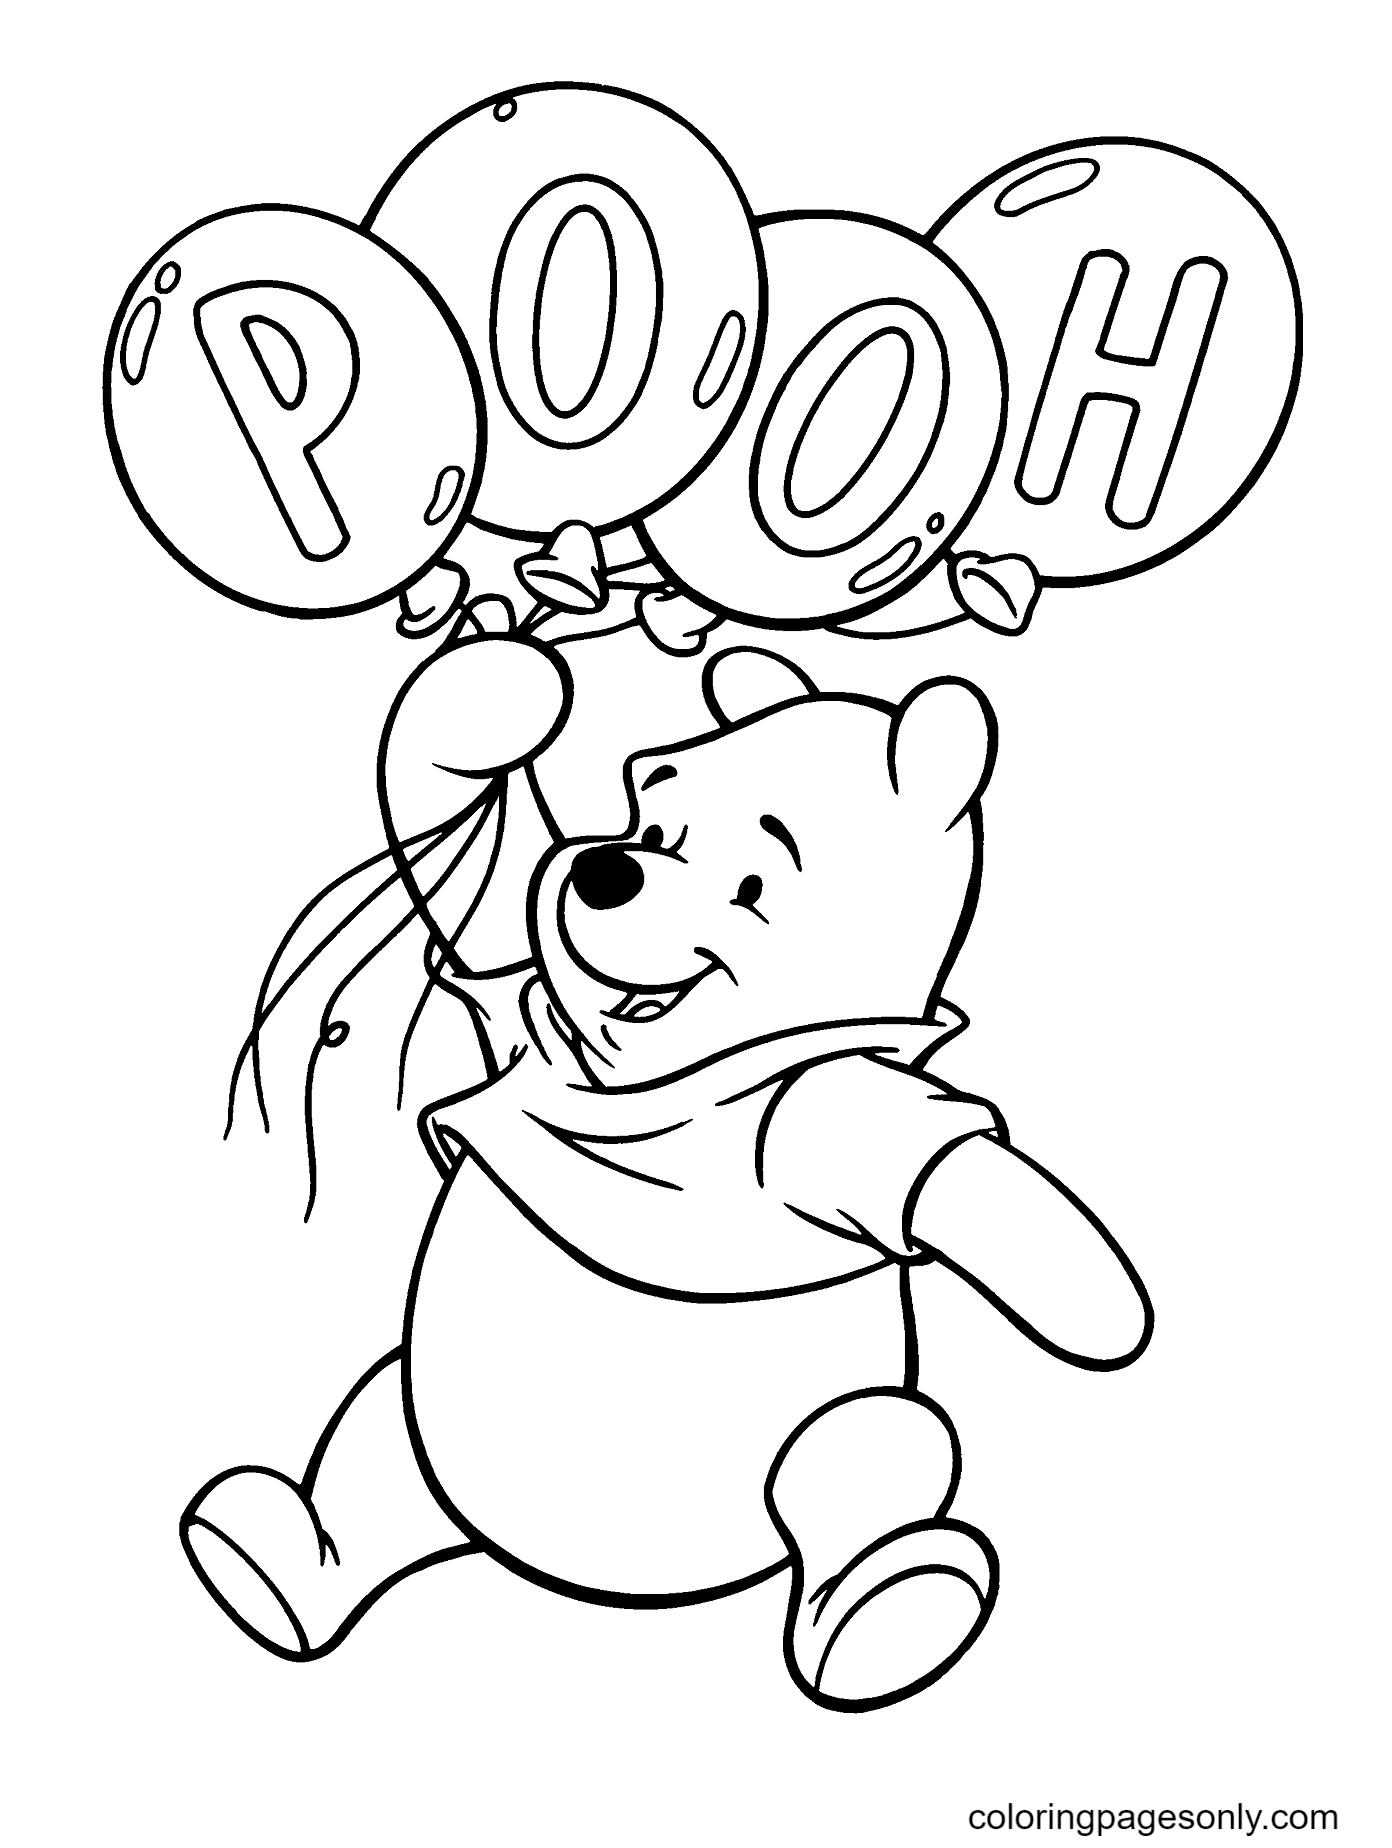 Pooh Bear with Balloons Coloring Pages